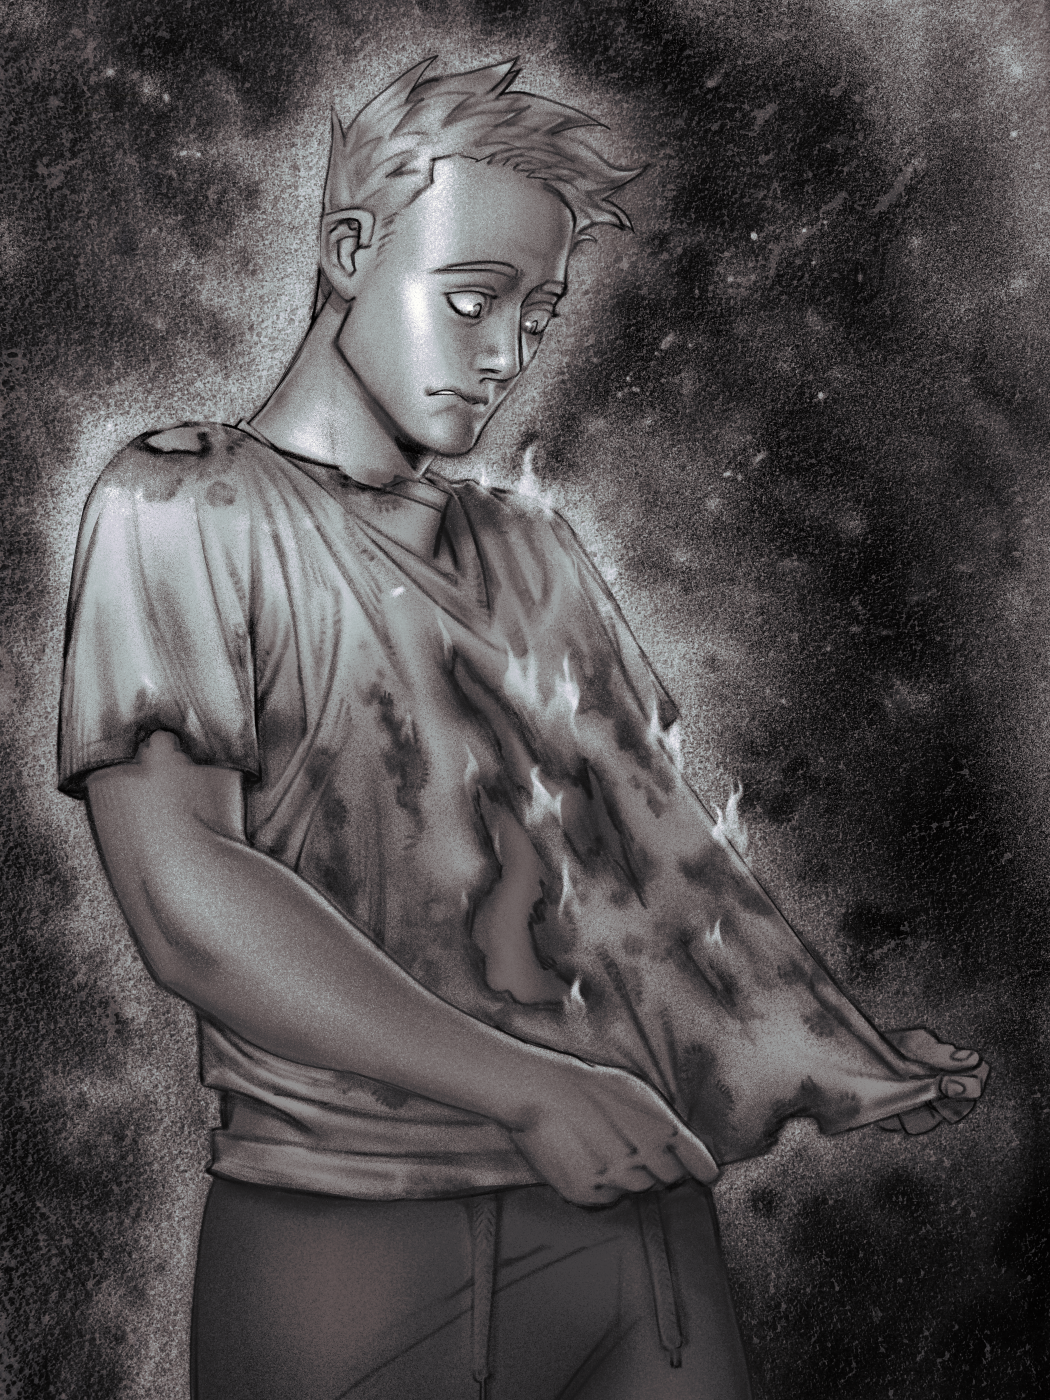 A greyscale illustration of a young man with shortly cropped hair holding out the front of his shirt to inspect the burnt marks and holes in it. His face is one of disbelief. Some parts of his shirt still burn with small embers.